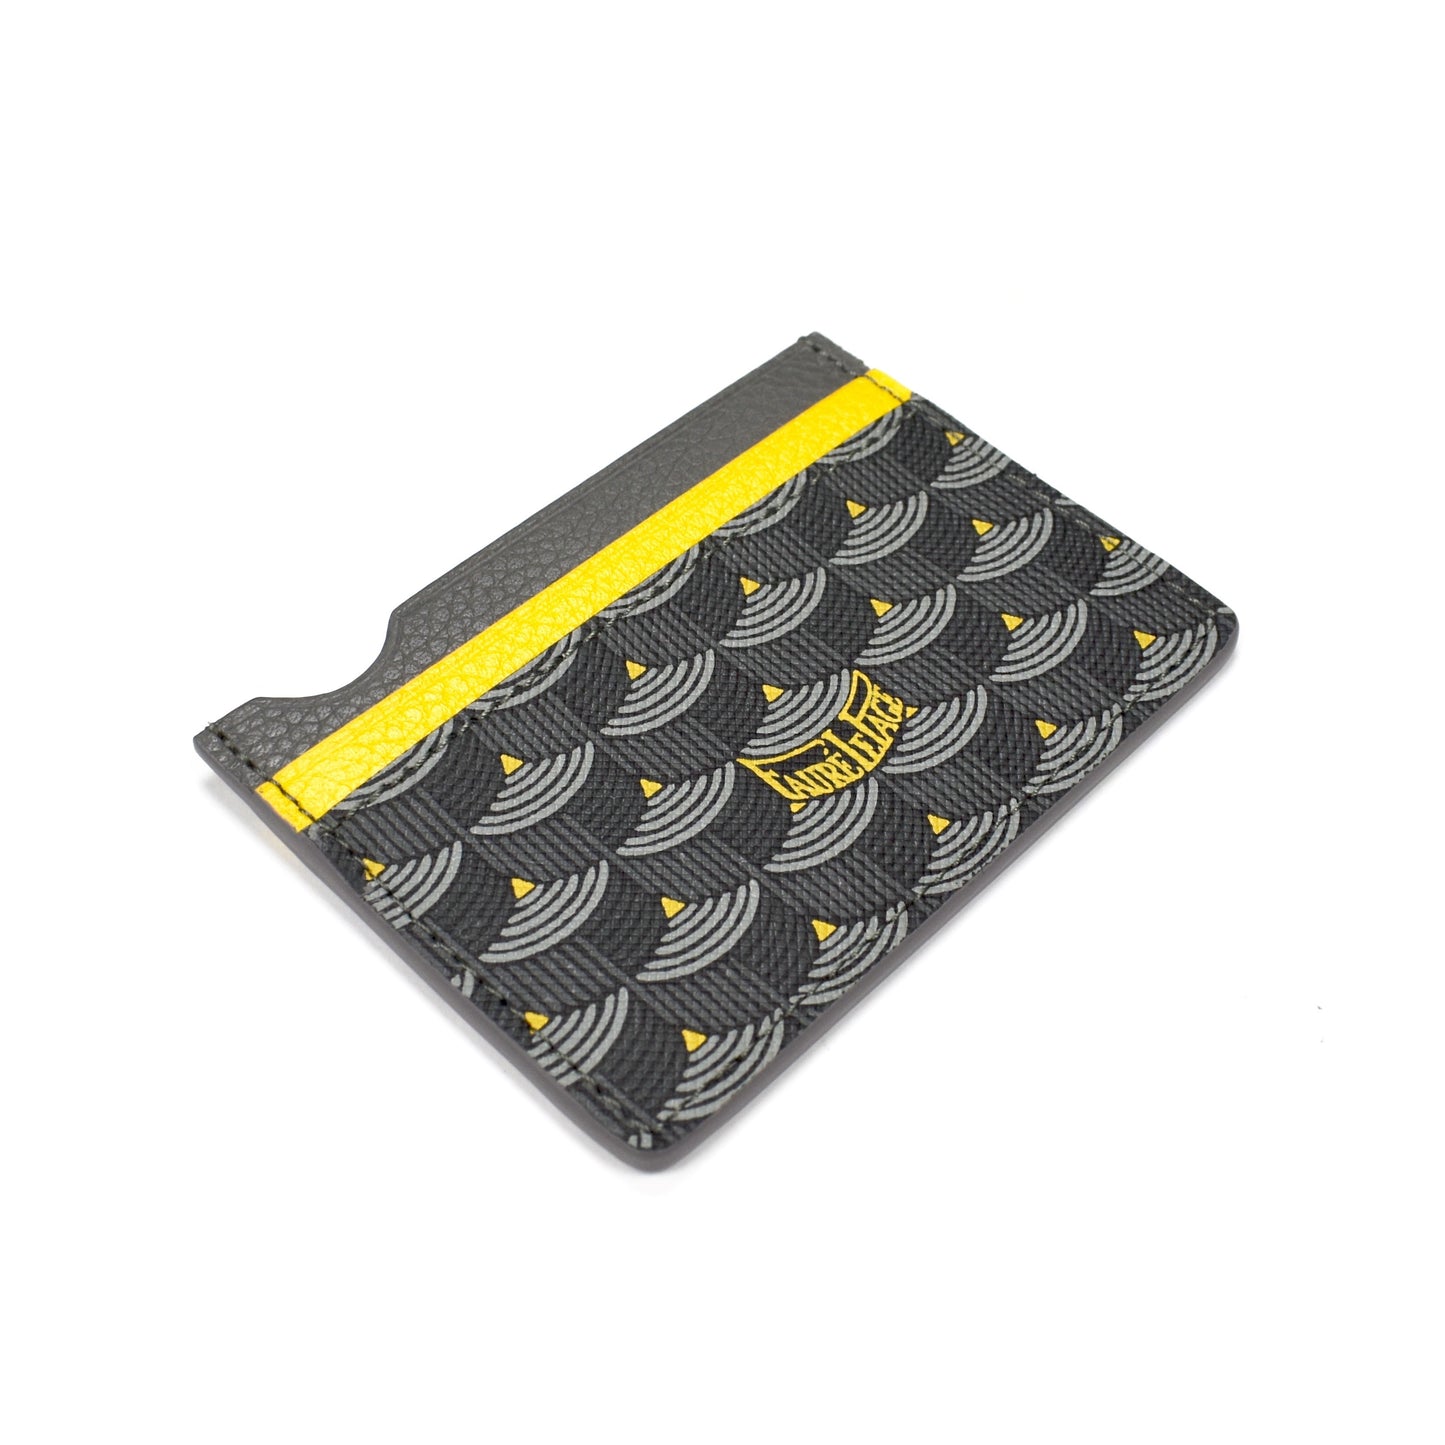 Faure Le Page - Steel Gray / Yellow 4CC Card Holder (2019)